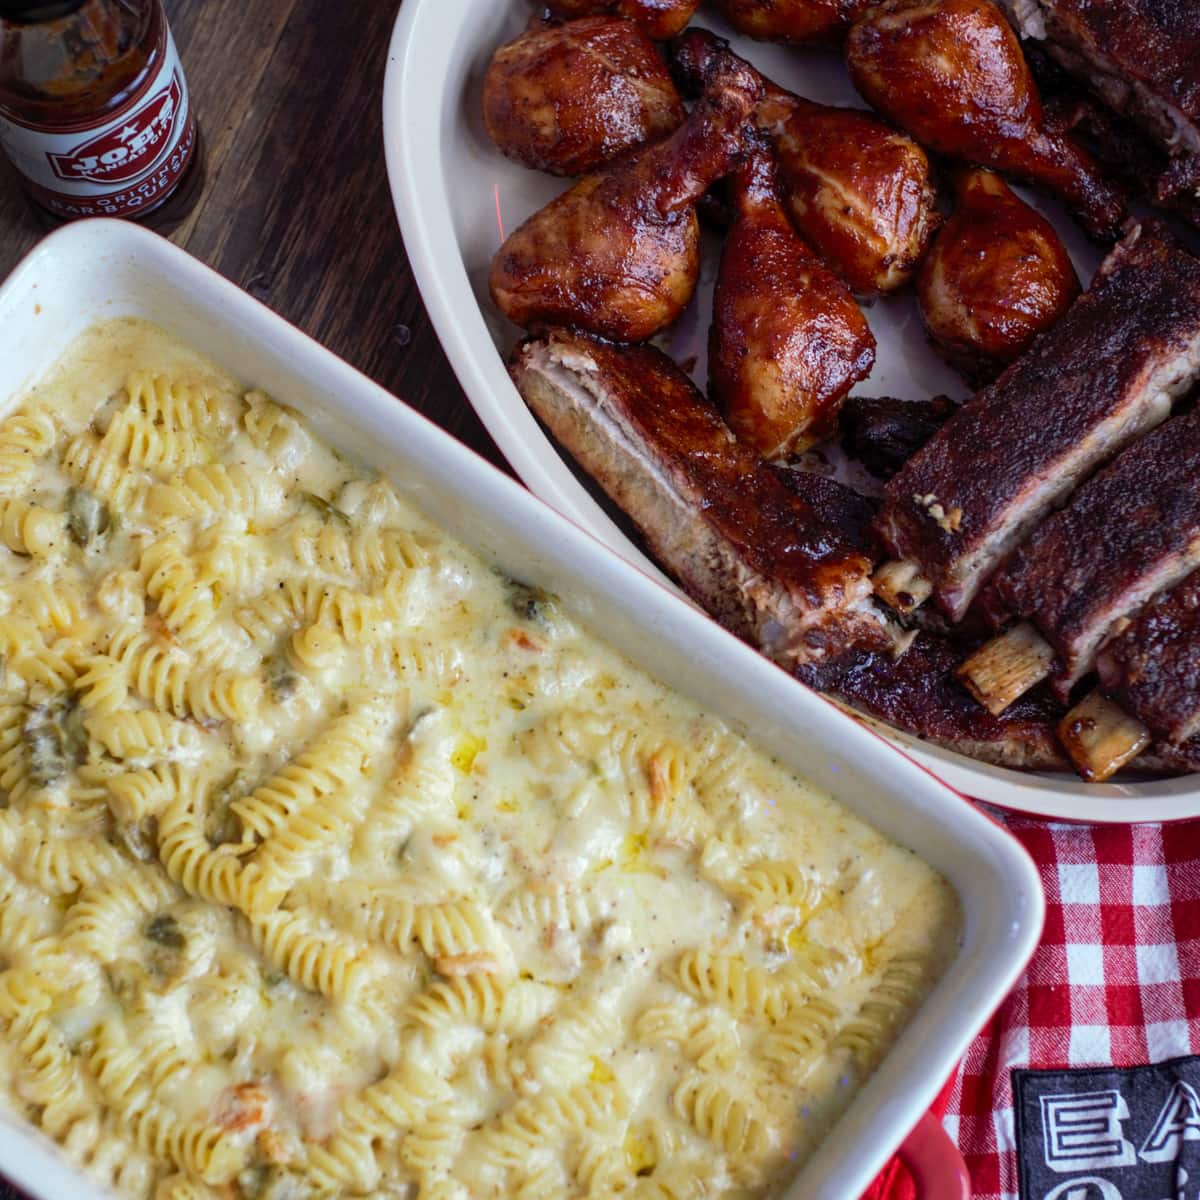 Table with barbequed meats and smoked cheesy mac.